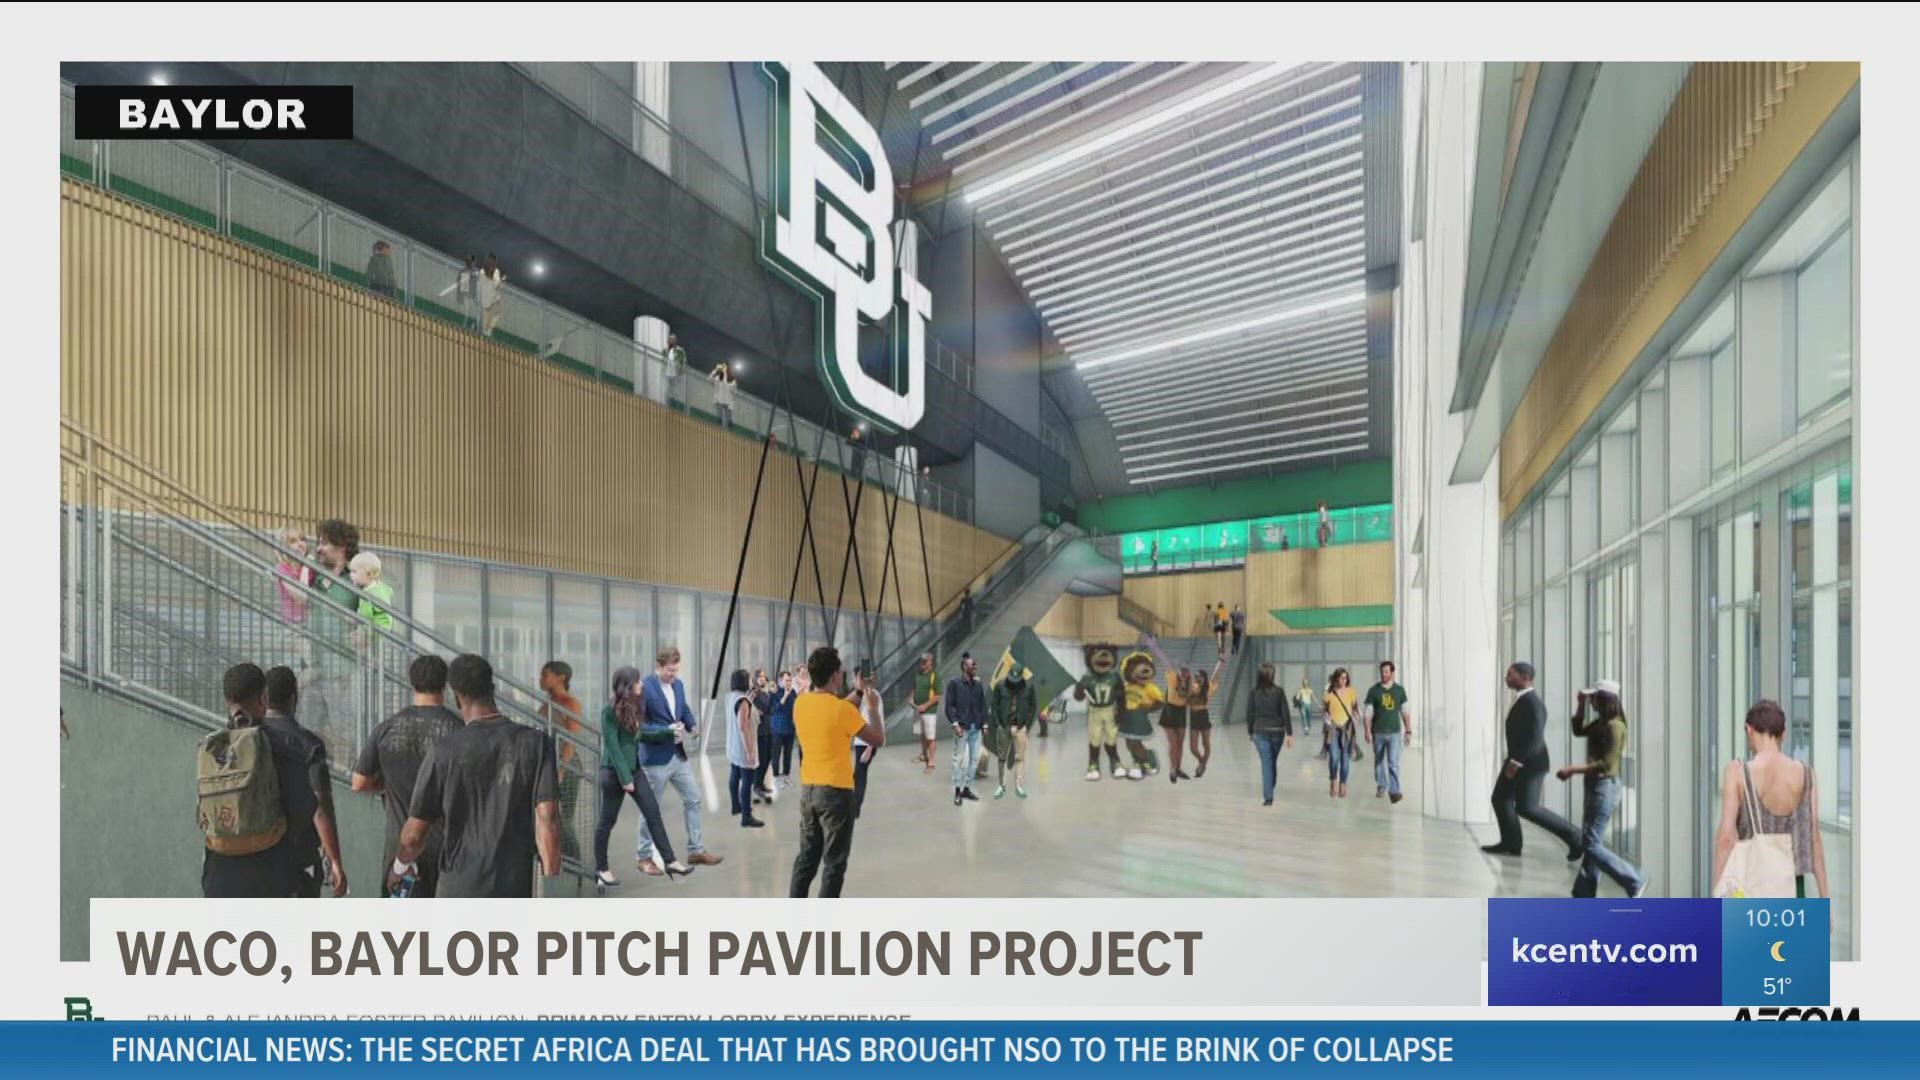 Baylor University wants to build a brand new pavilion, which would be the cities largest economic development, according to Mayor Meek.